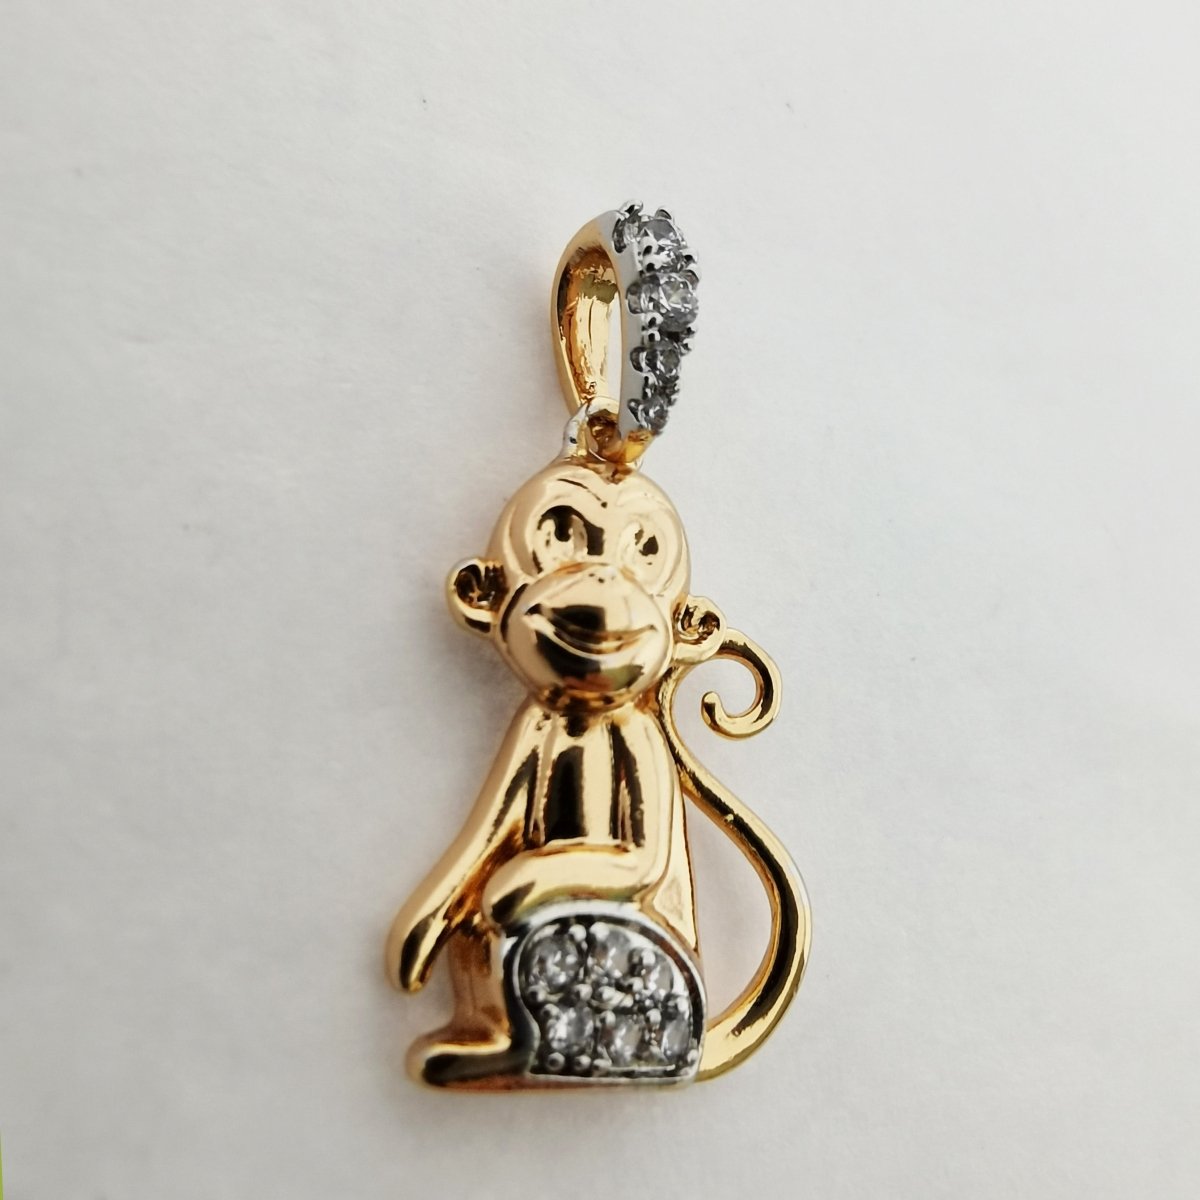 Cute Monkey Pendant in 24k Gold Filled with Clear Cubic Zirconia Funny Wild Animal Inspired I-715 - DLUXCA